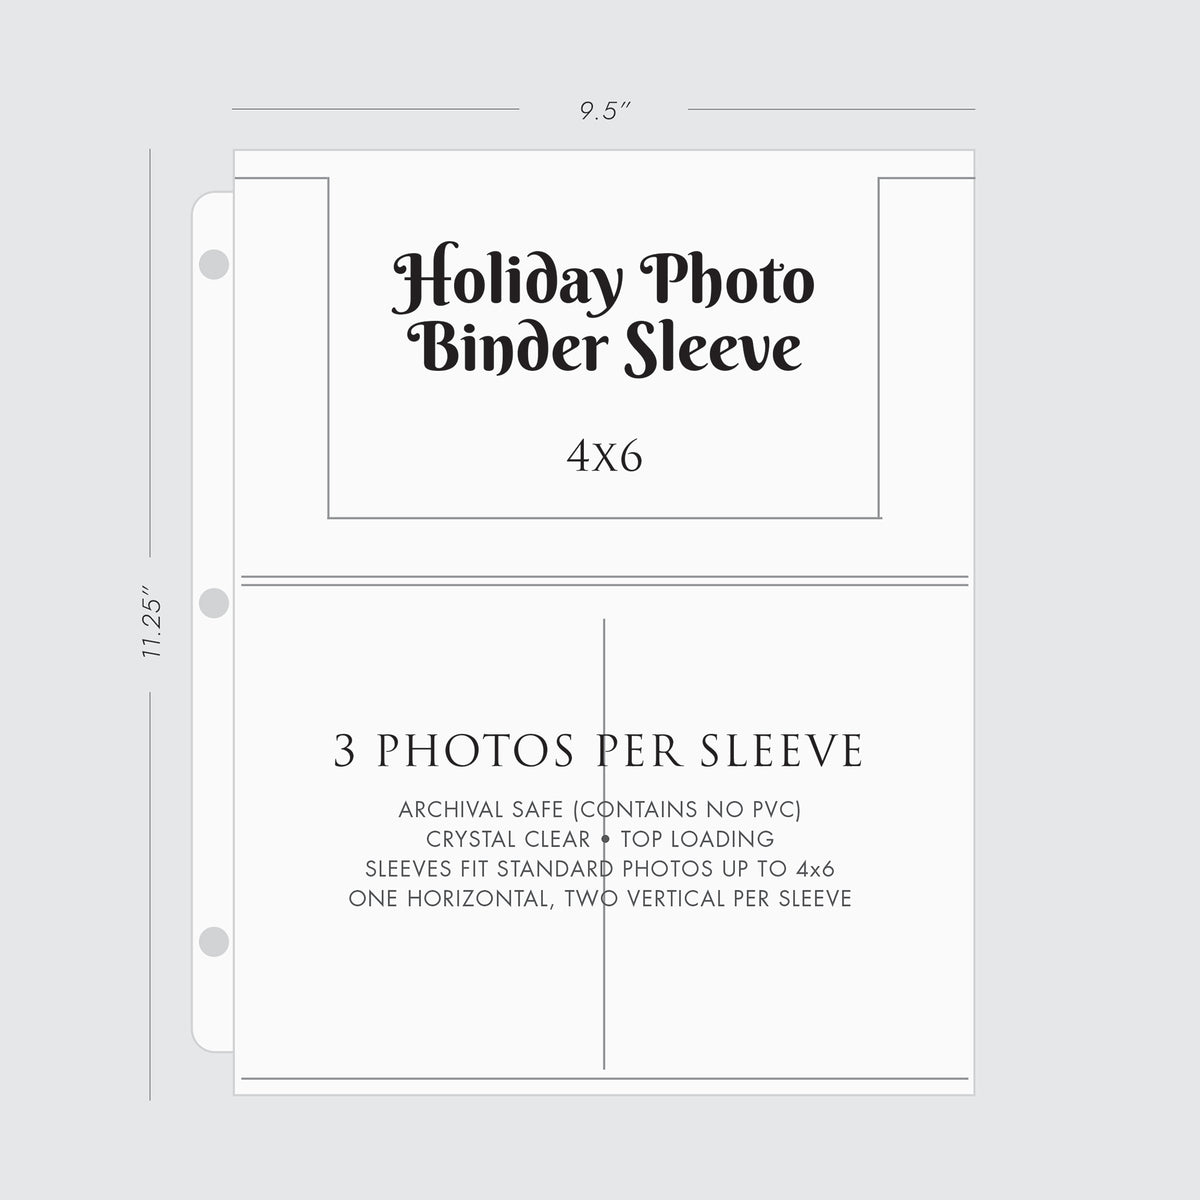 Large Holiday Photo Binder with Red Vegan Leather Cover for 4x6 or 5x7 Photos